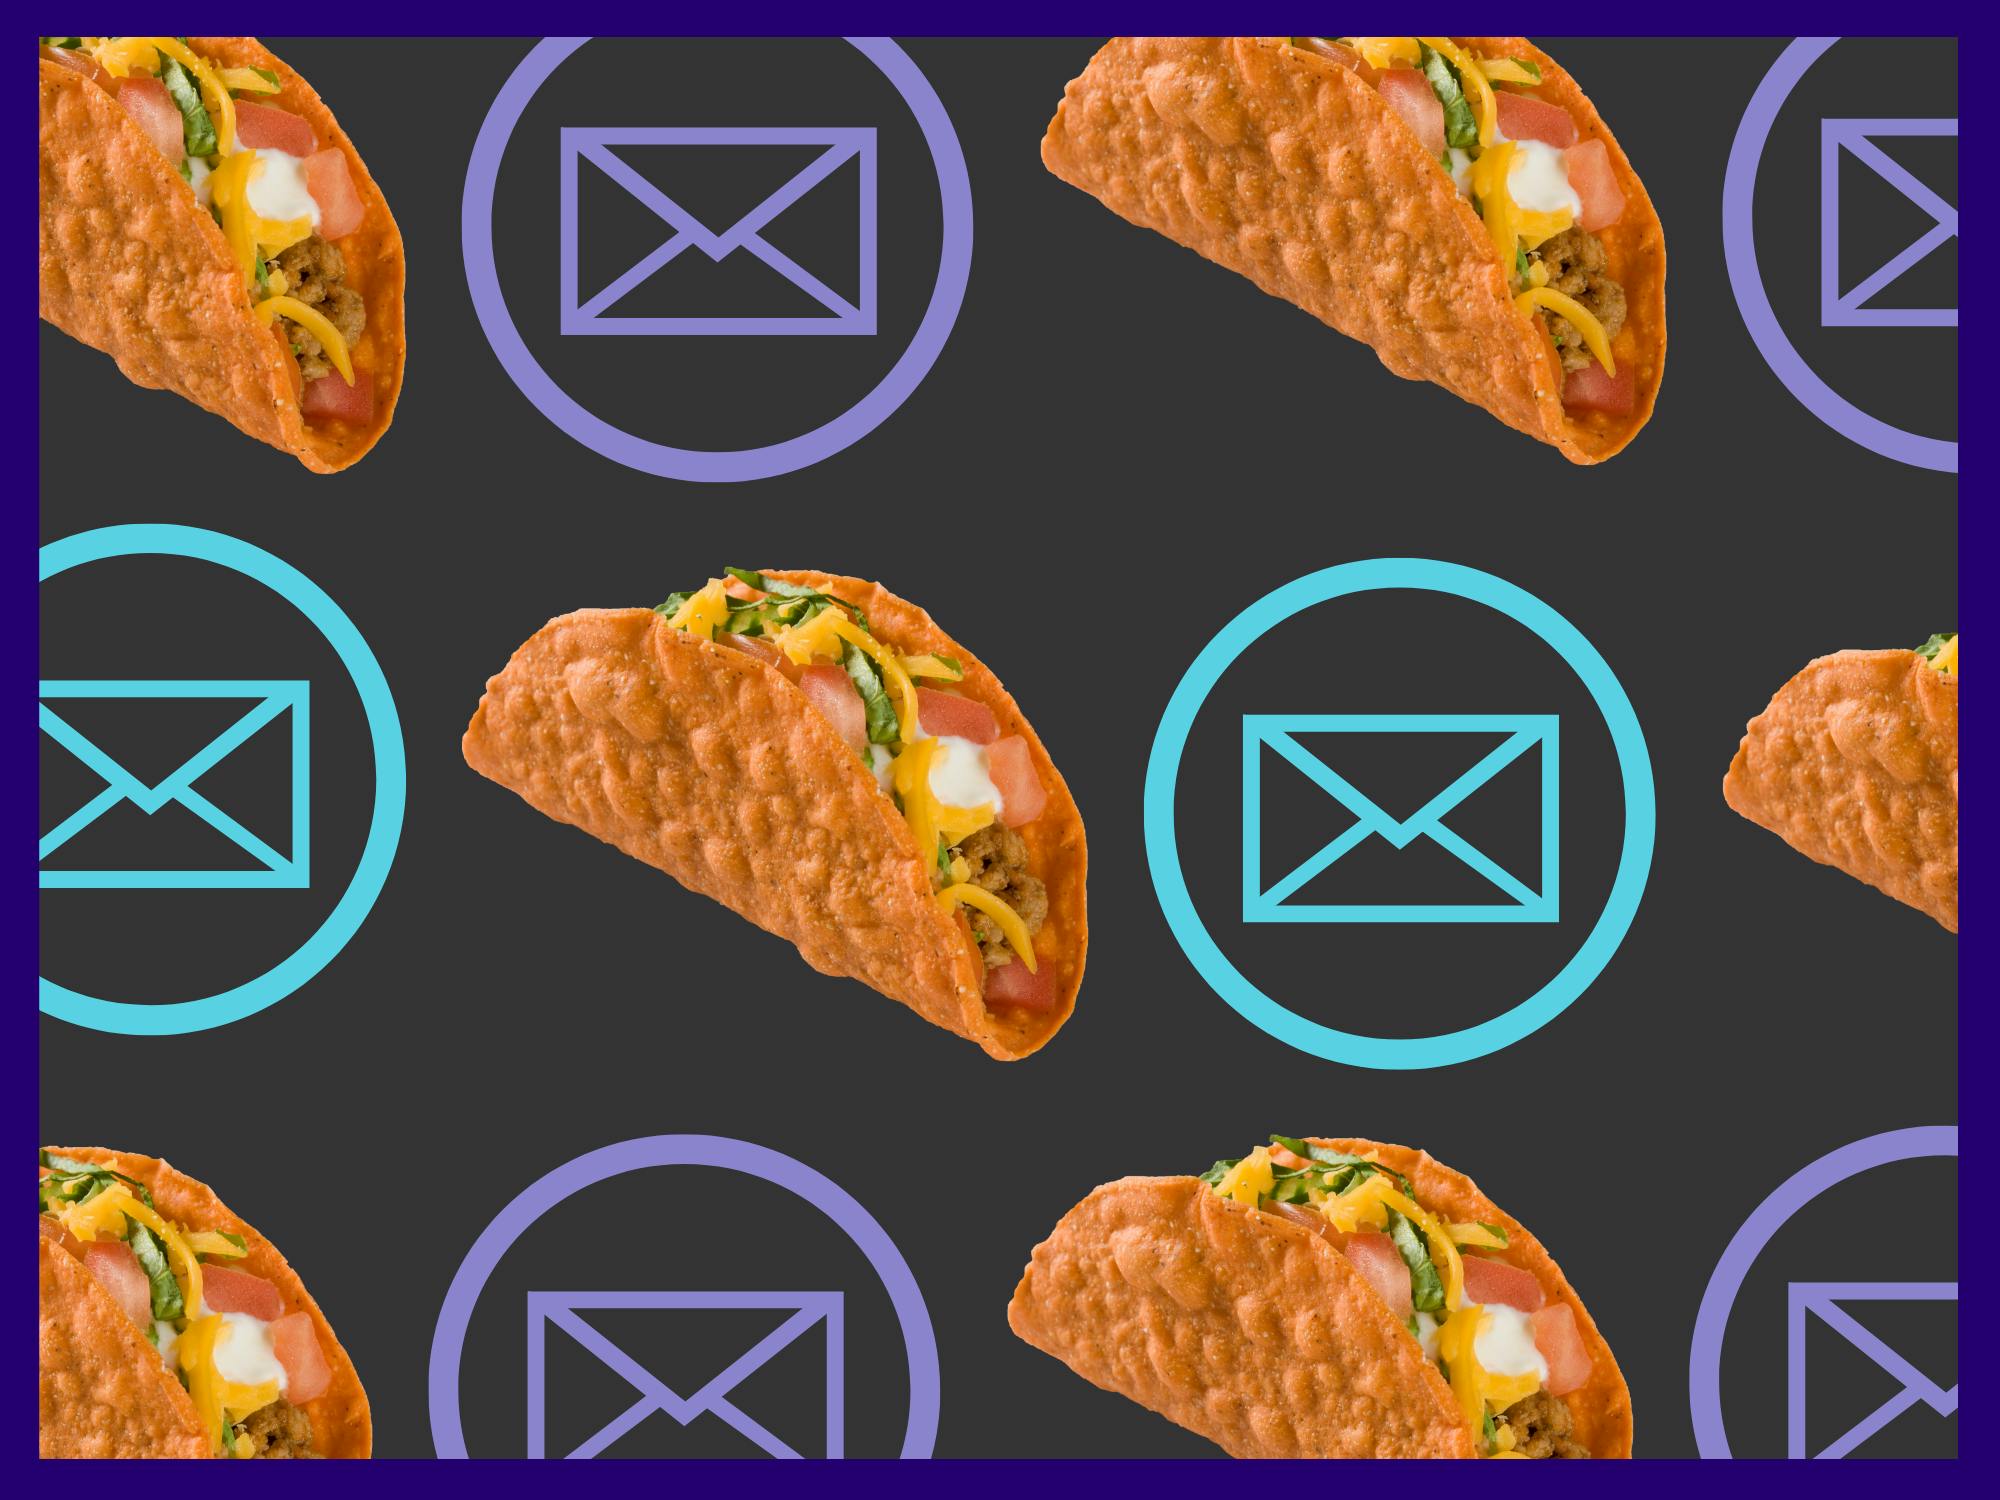 backstroke email subject line generator: you don't order tenders at the taco place